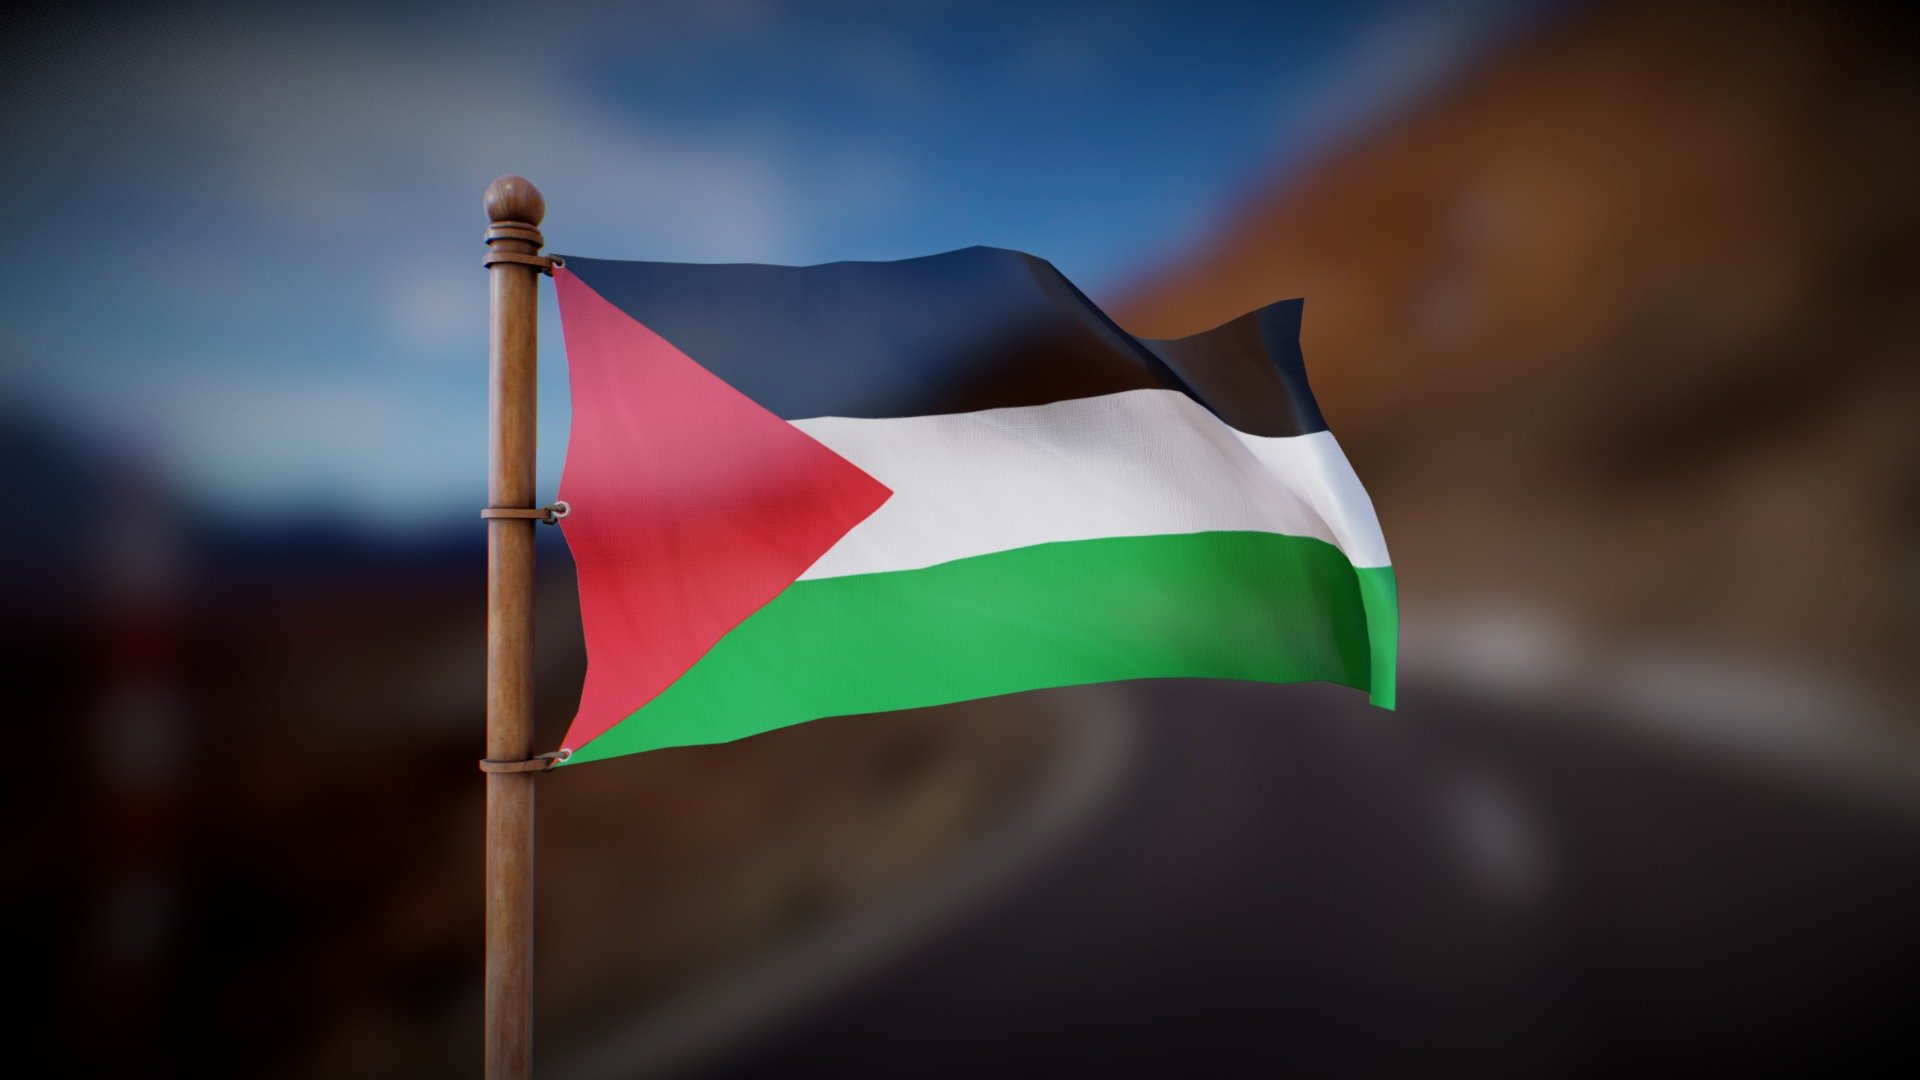 Flag waving in the wind in a looped animation

Joint Animation, perfect for any purpose
4K PBR textures

Feel free to DM me for any question of custom requests :) - Flag of Palestine - Wind Animated Loop - Buy Royalty Free 3D model by Deftroy 3d model